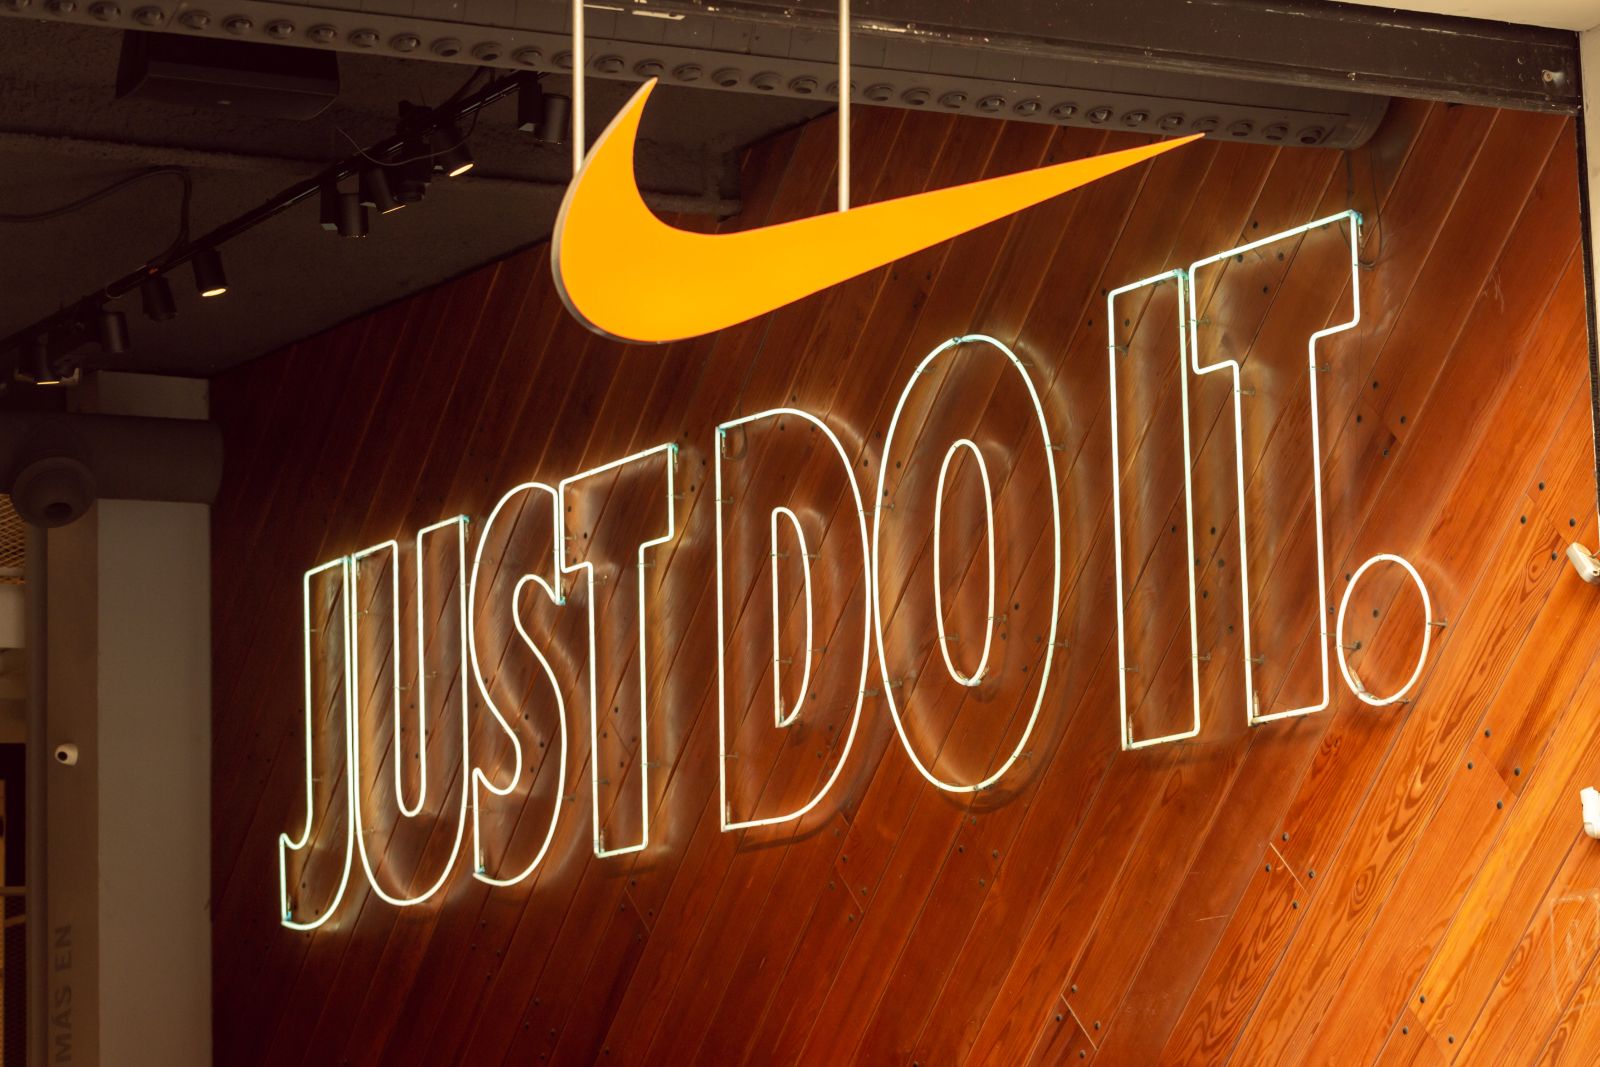 Consumer Products - Nike Neon Sign via Shutterstock